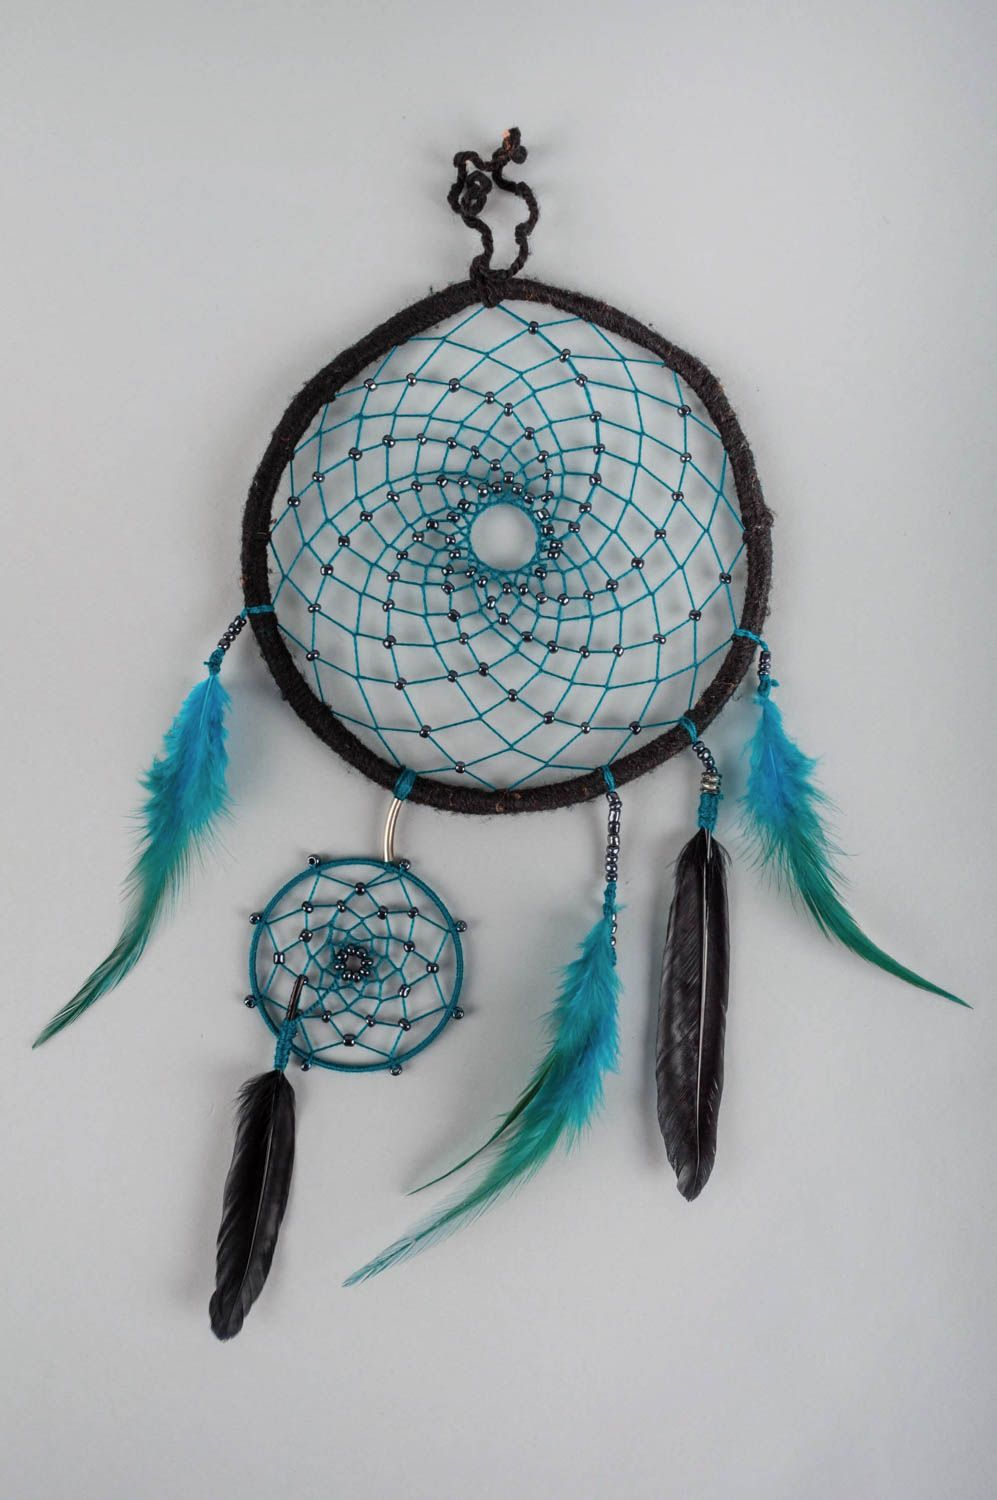 Unusual handmade Indian dreamcatcher amulet home charm cool bedrooms gift ideas photo 2